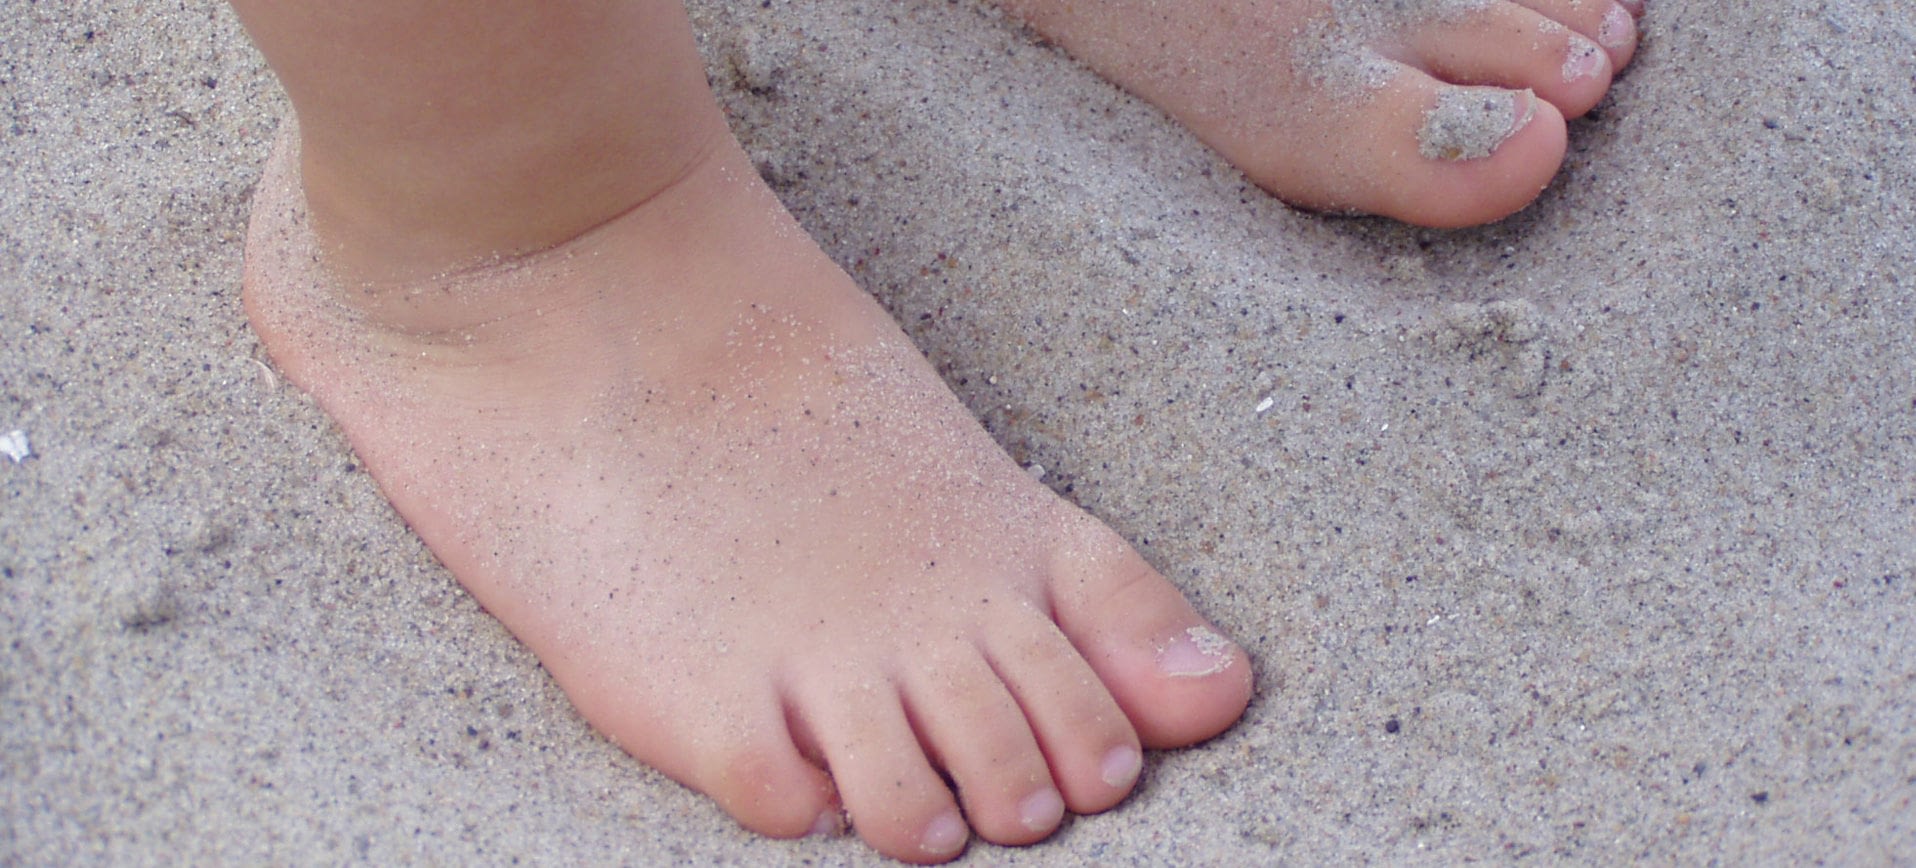 what is flat feet